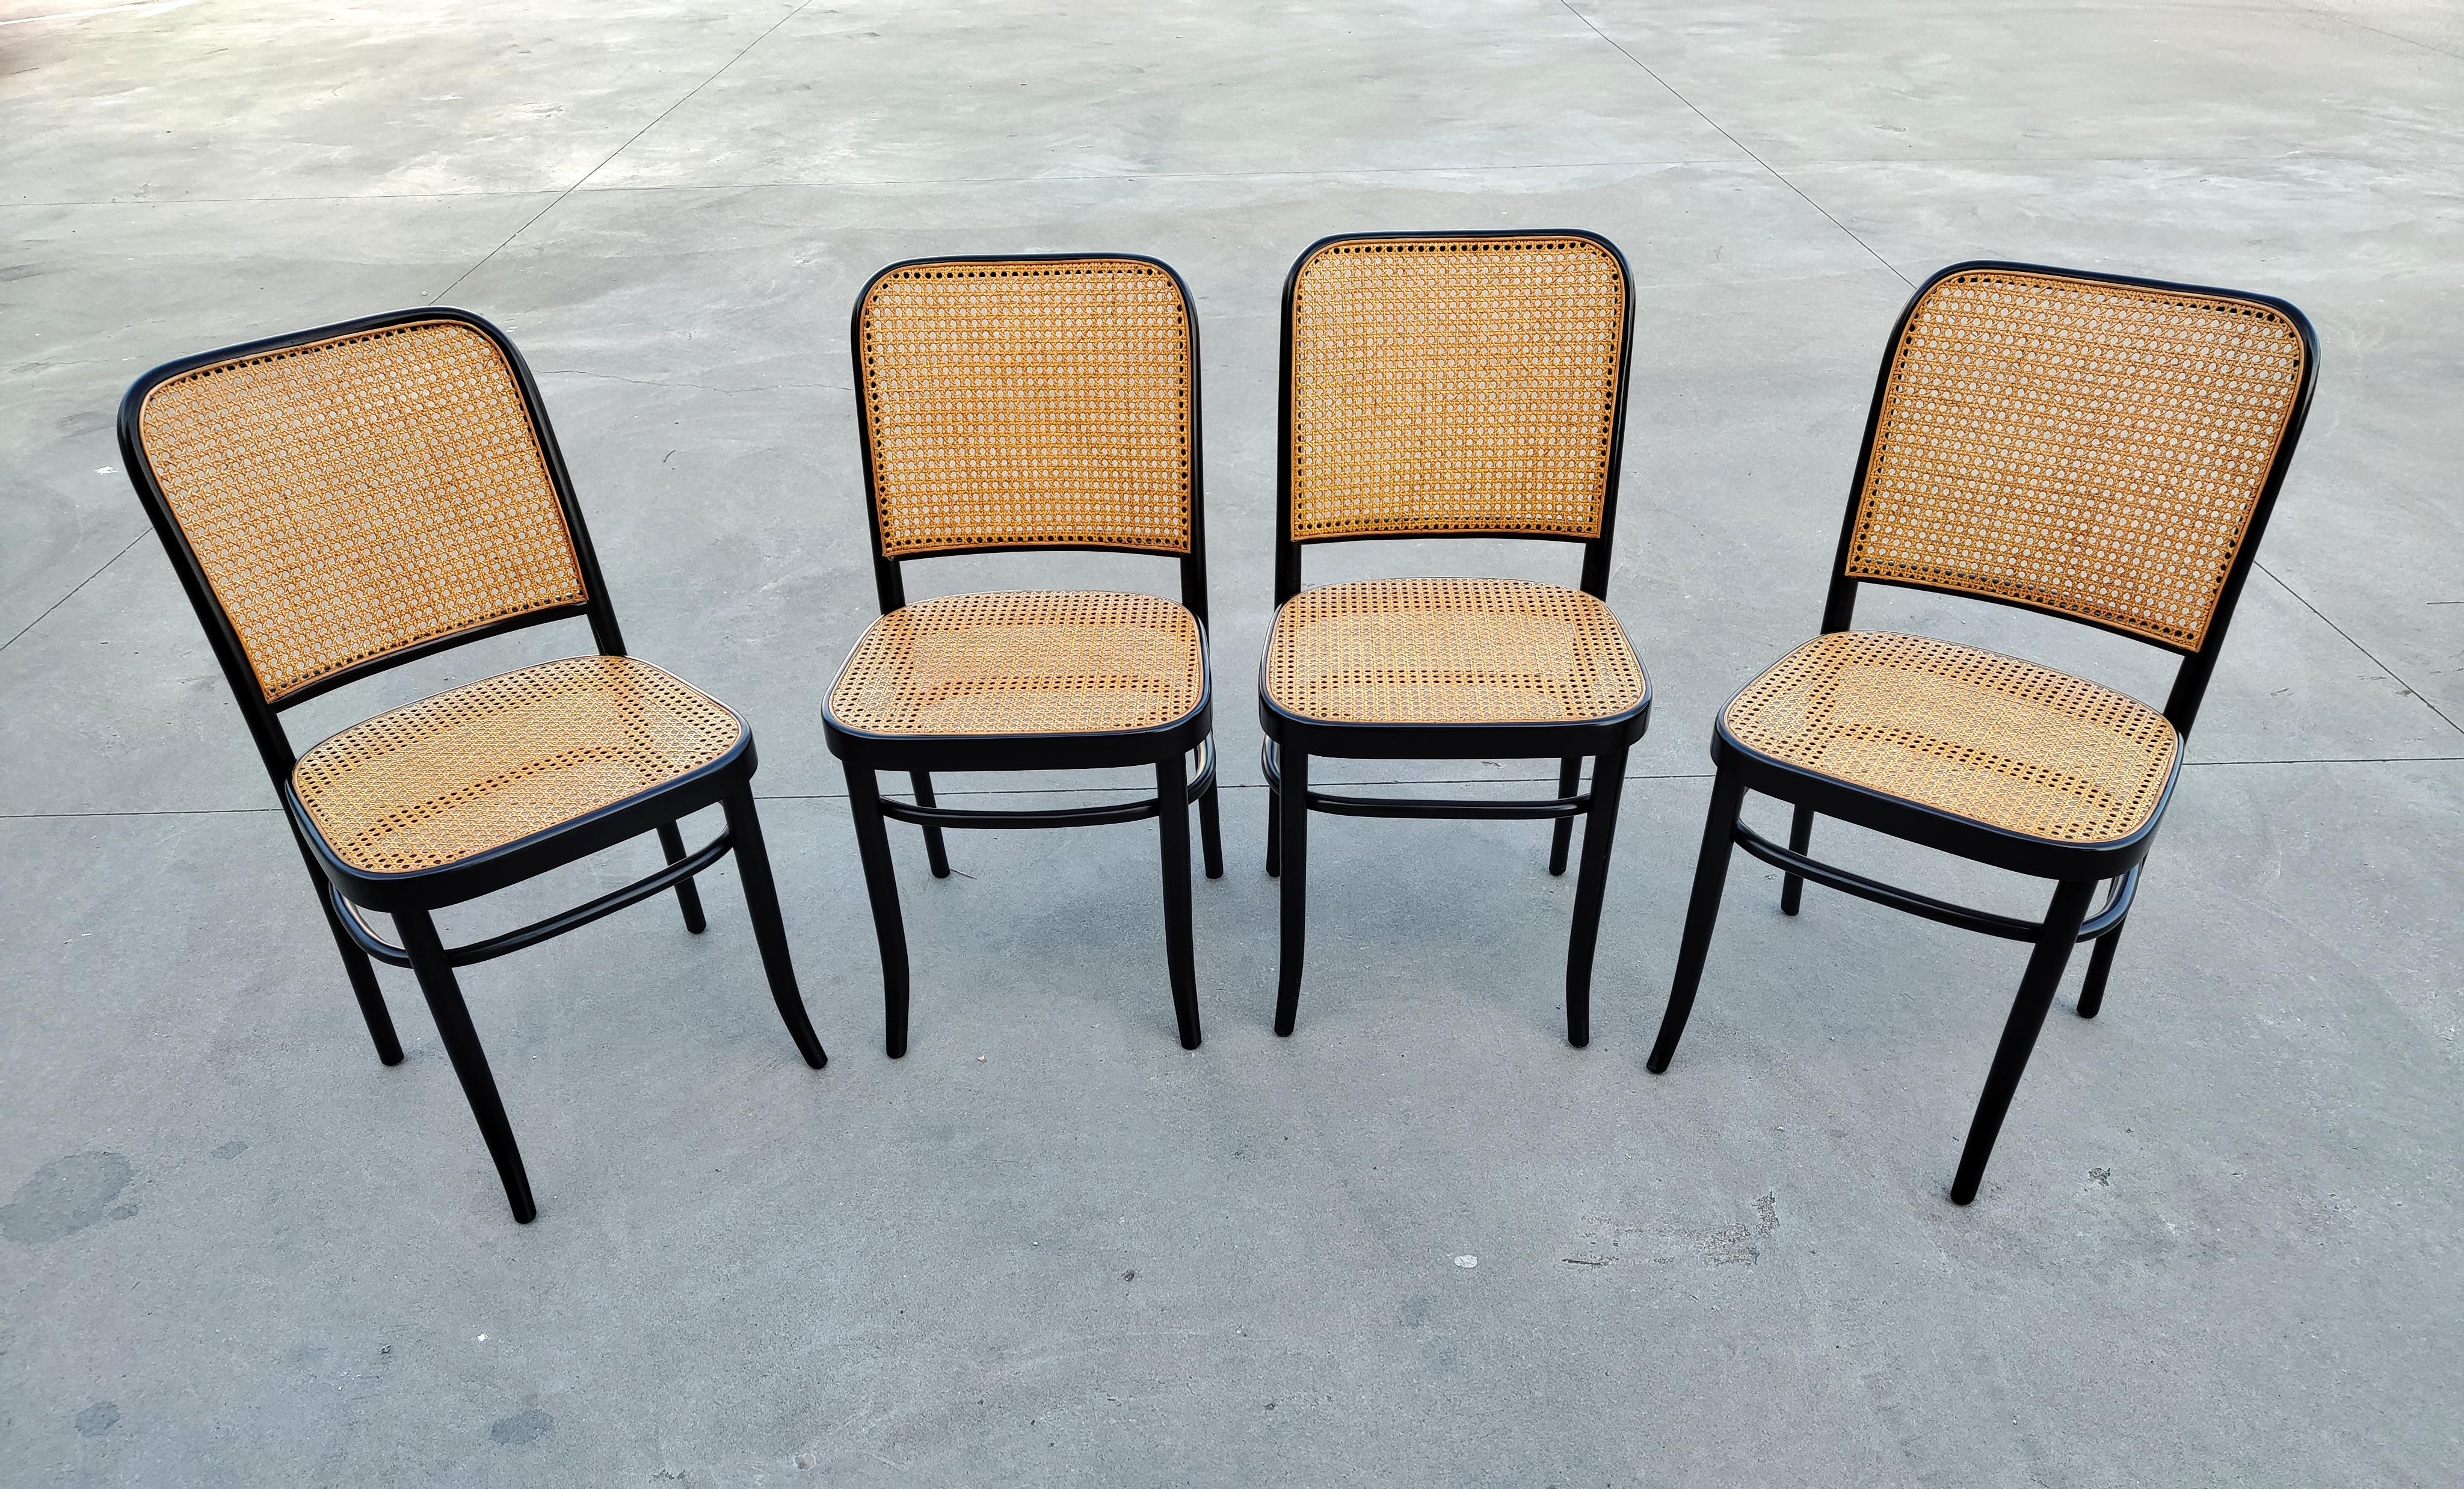 In this listing you will find a set of rare vintage dining chairs designed by Josef Hoffmann for Mundus. The frame of the chairs is done in beech bentwood and painted in black with cane seats and backrest.

Chairs were manufactured by Mundus